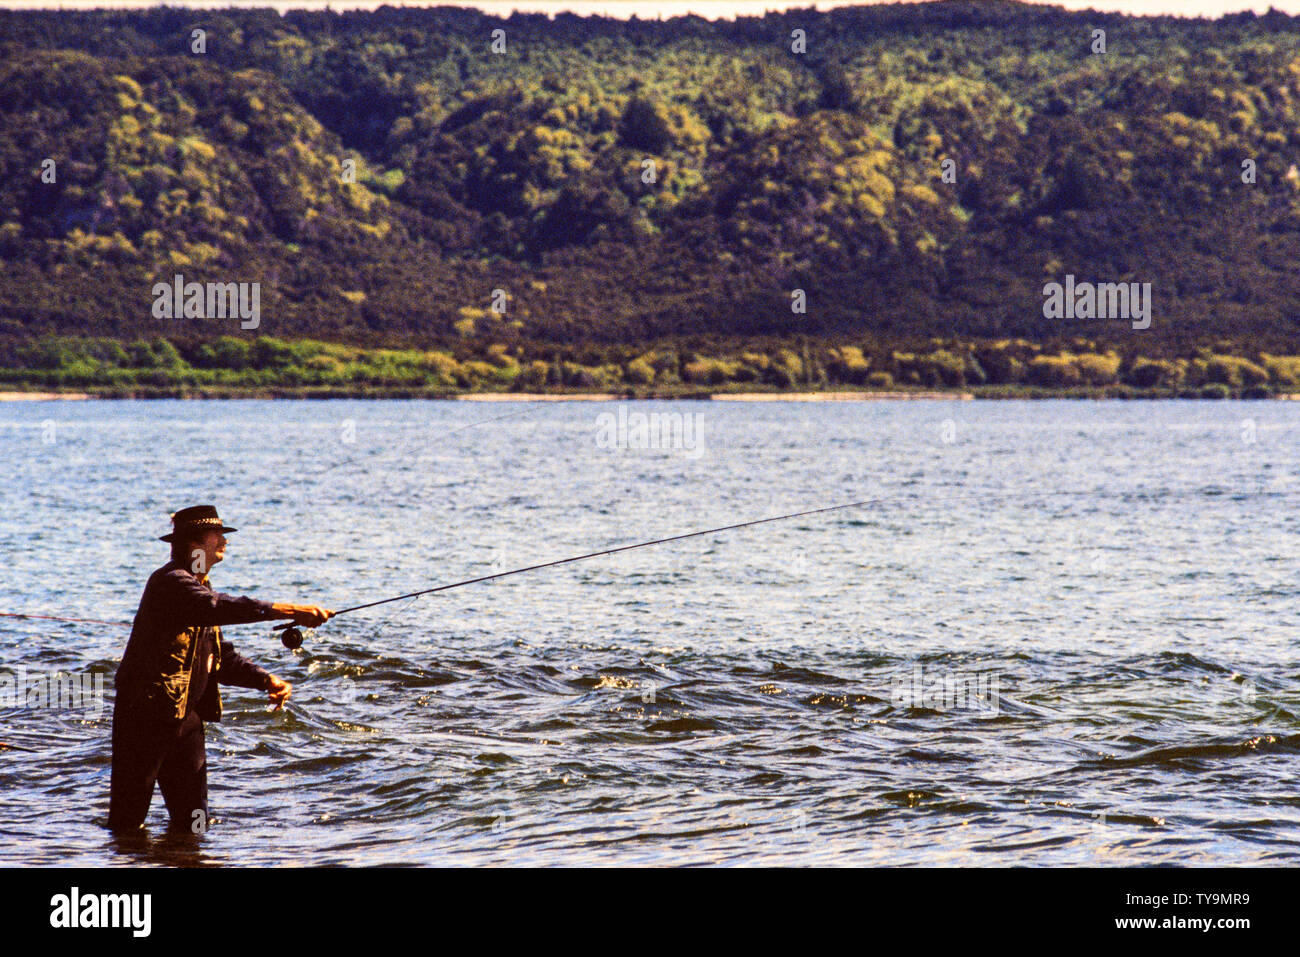 New Zealand, North Island. Man fishing in Lake Taupo, a noted trout fishery with stocks of introduced brown and rainbow trout. Photo: © Simon Grosset. Stock Photo